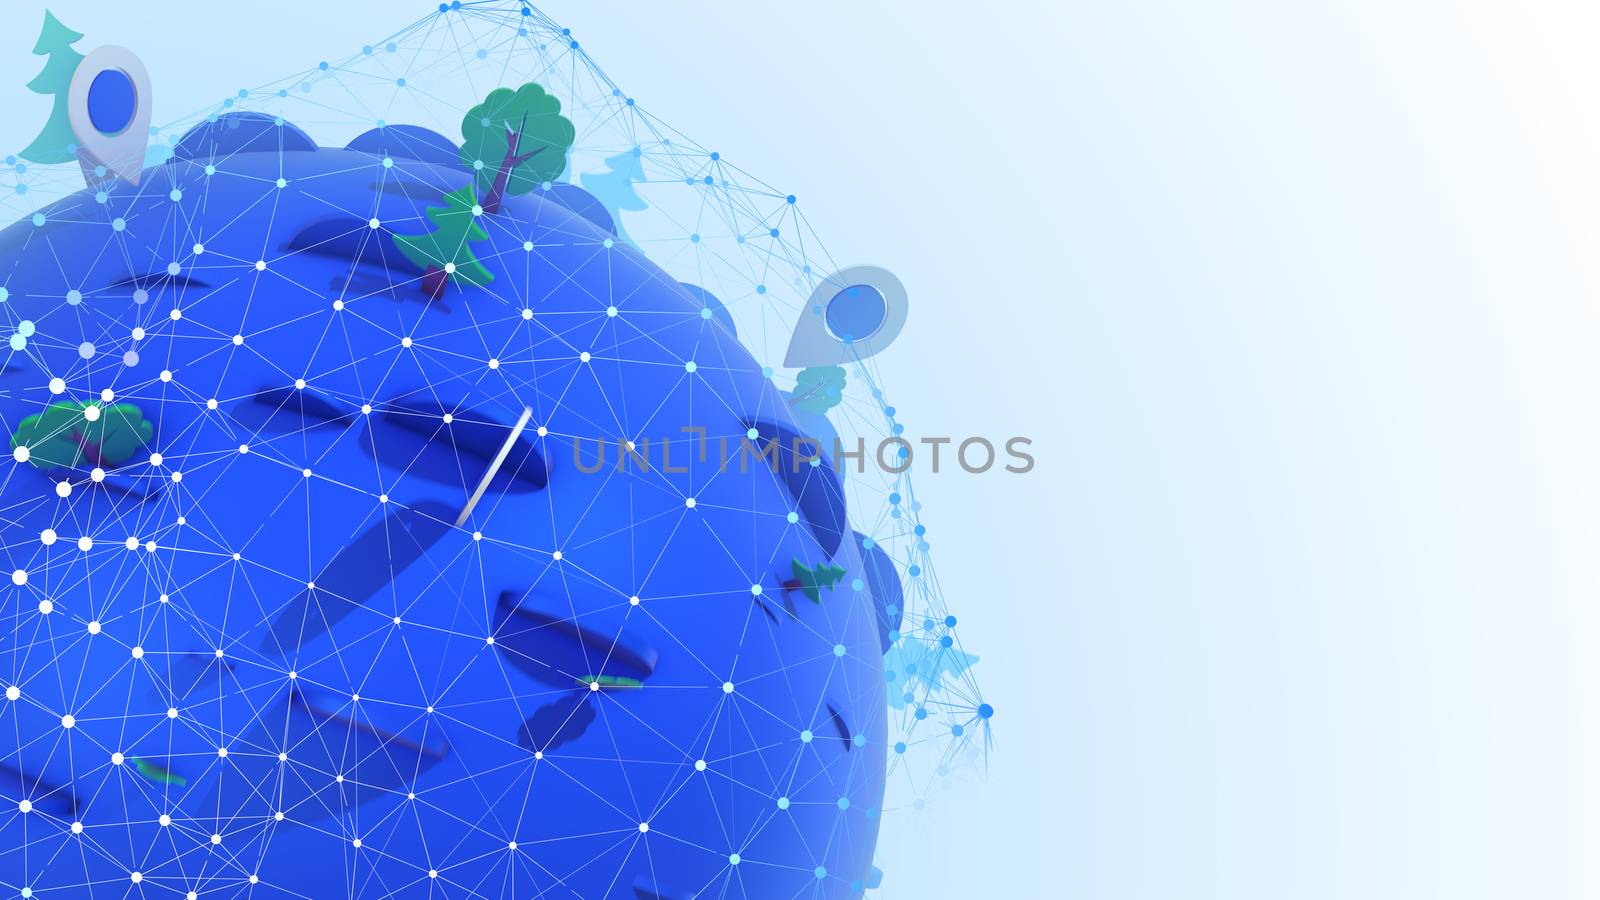 Graphic 3d illustration of a blue globe covered with a grid of geolocation points, green trees, white symbols and blue modules in the white background